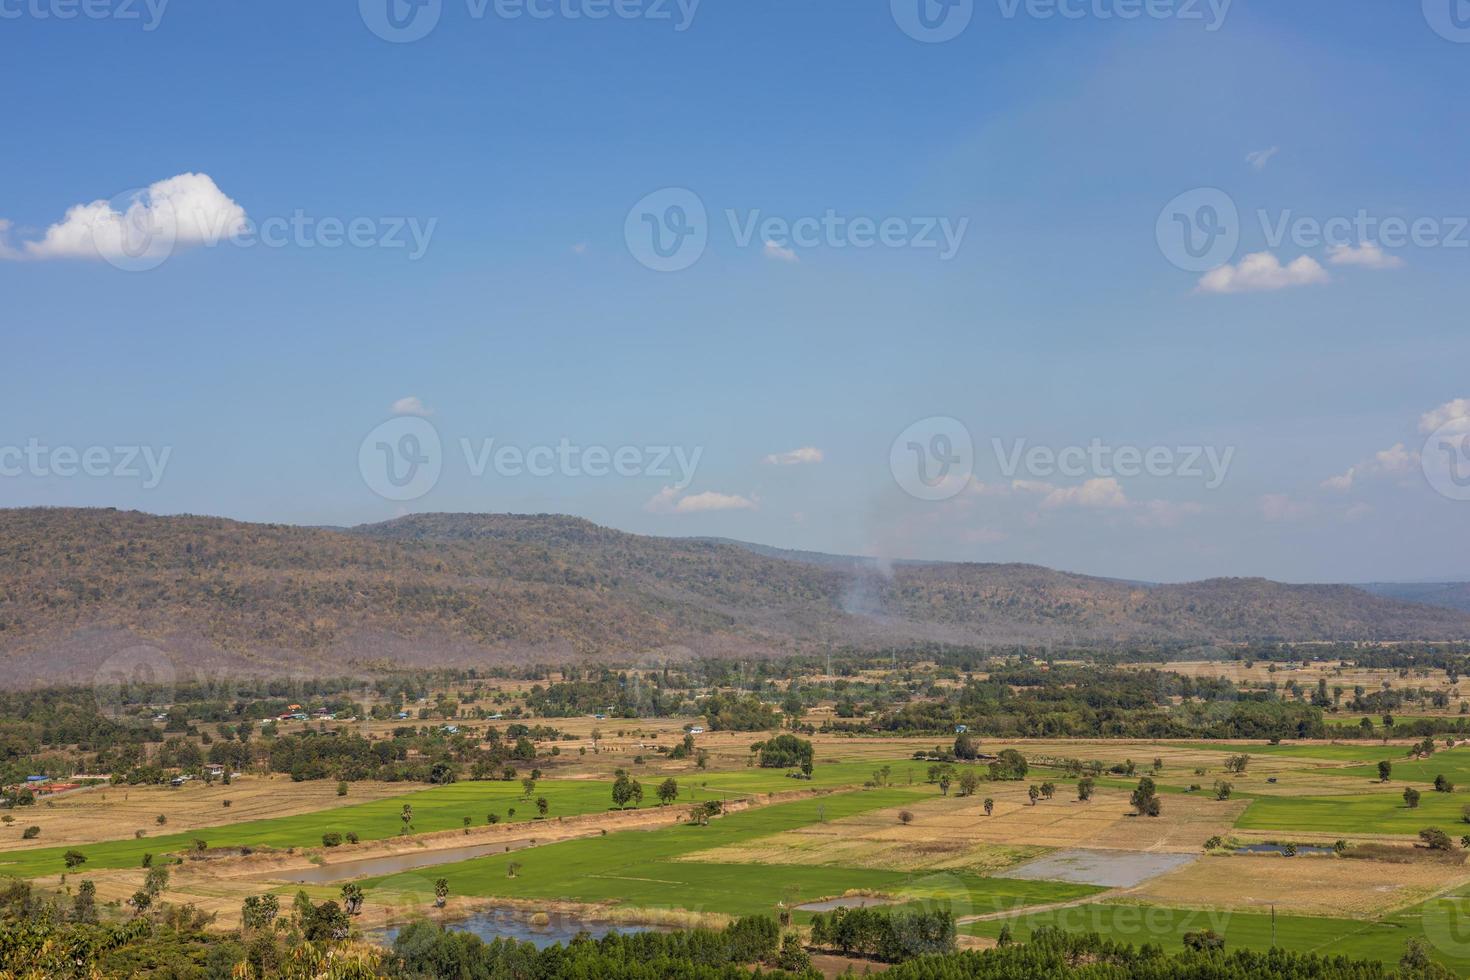 A panoramic view of the hills with villages, trees and rice fields with clouds in the sky. photo